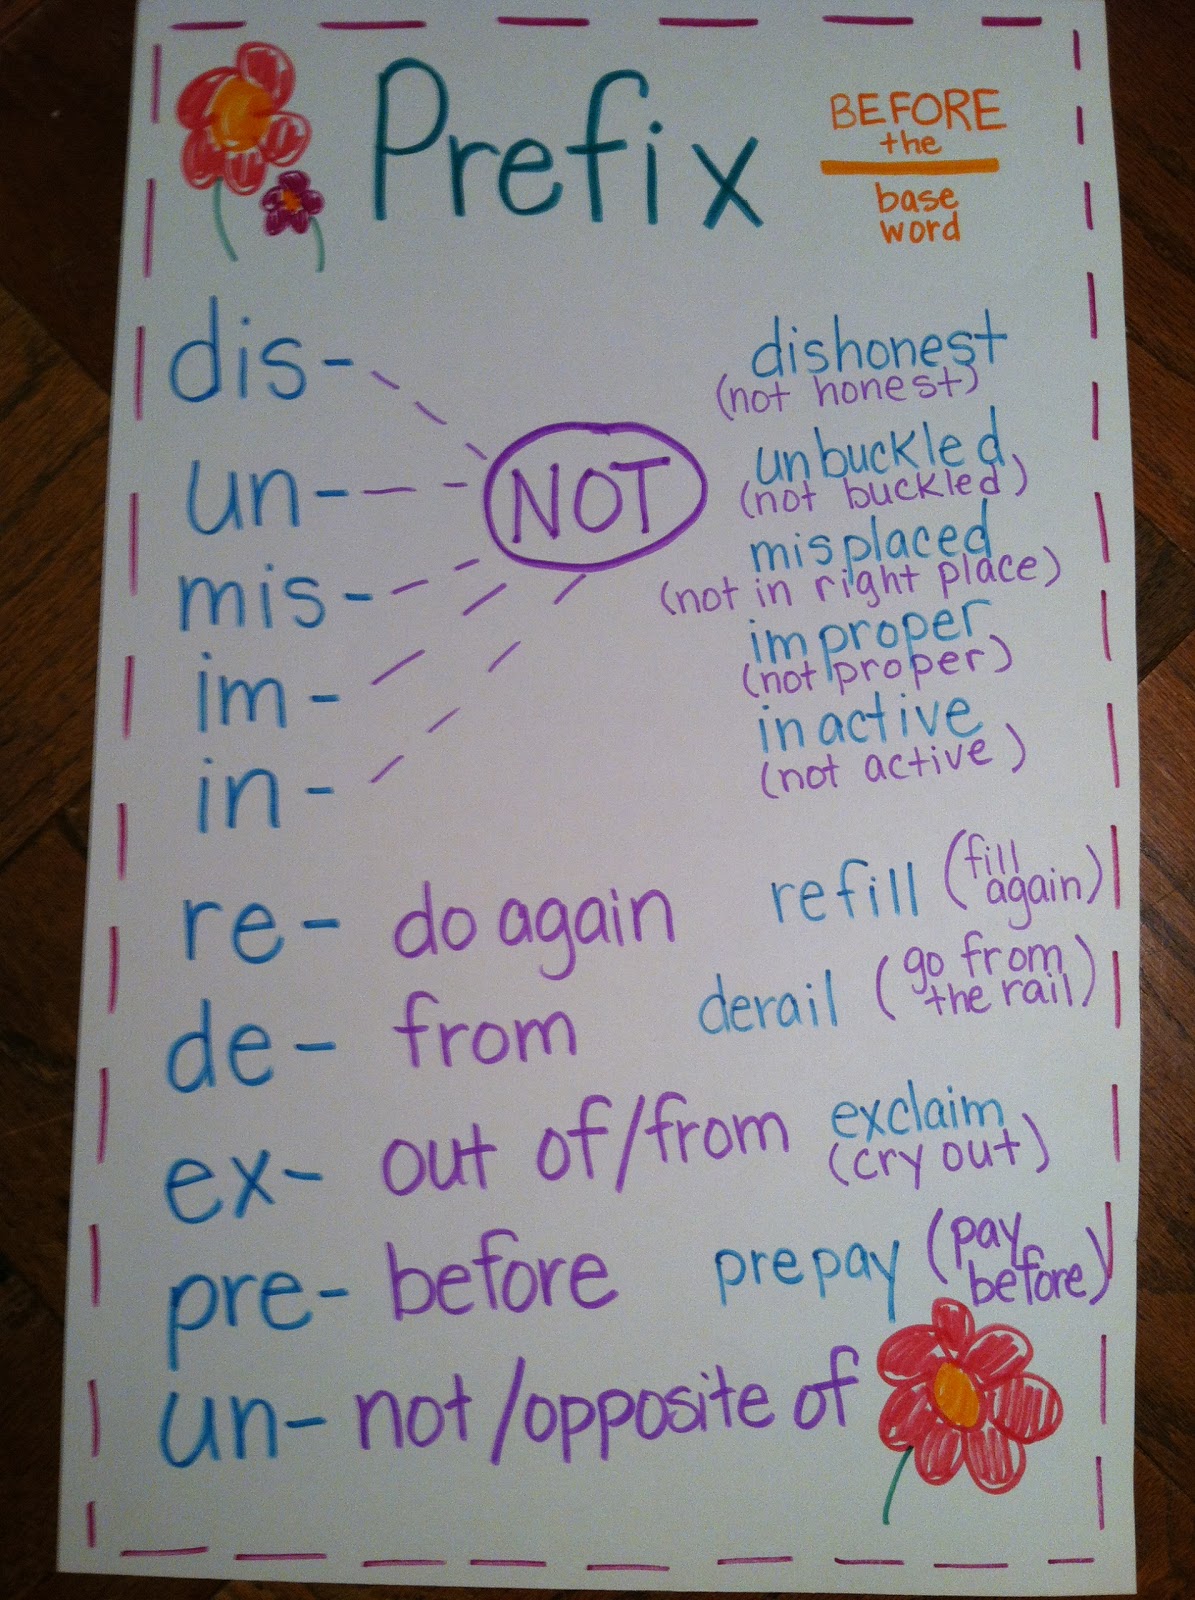 Anchor Chart For Suffixes